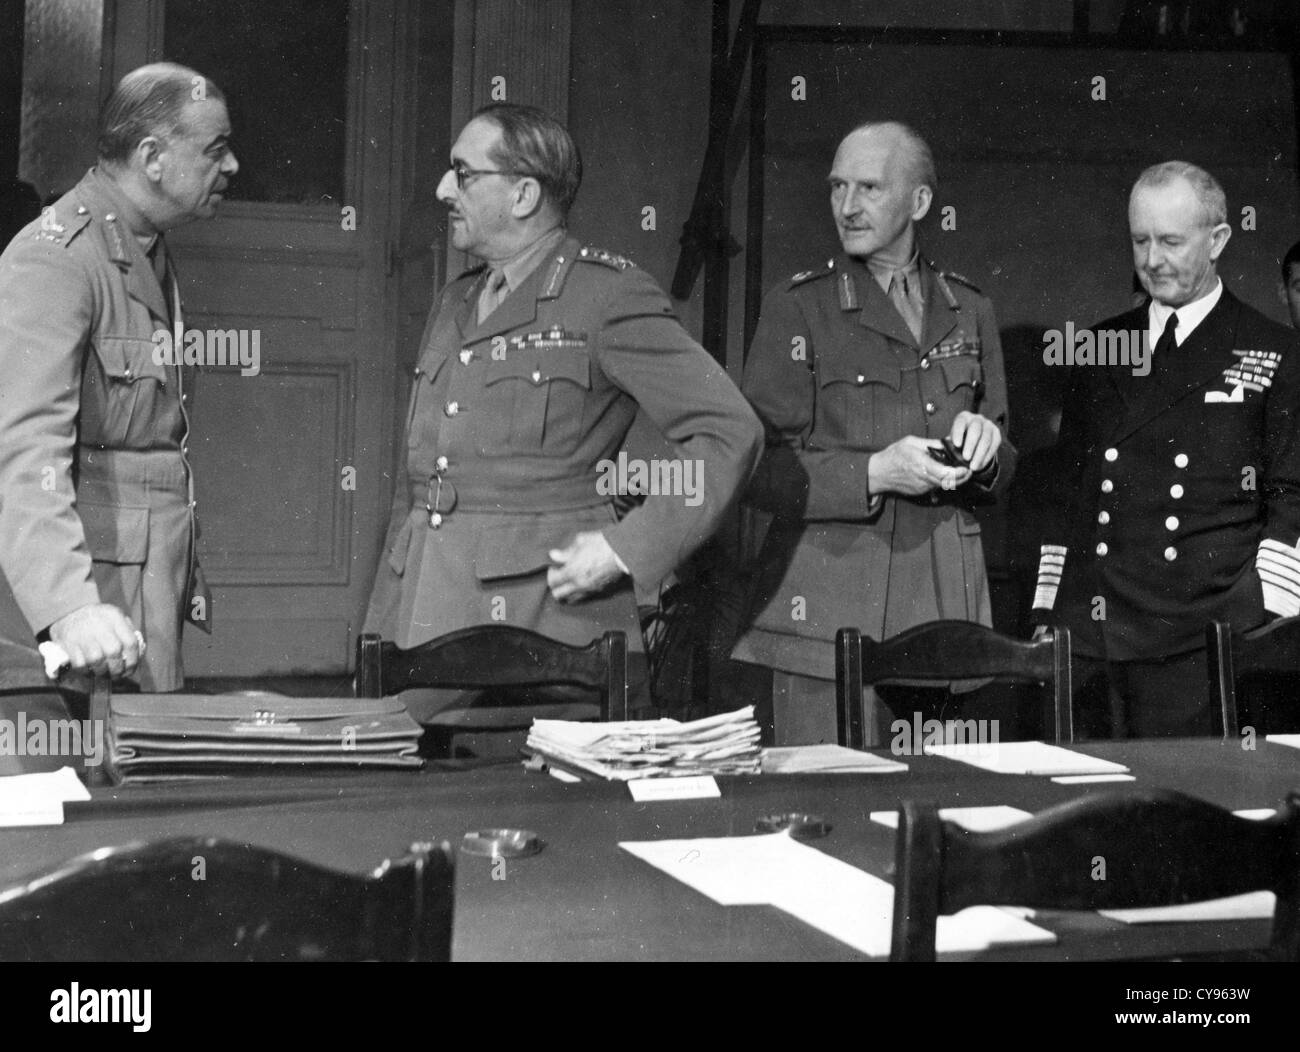 TEHRAN CONFERENCE 1943. Members of the British delegation - see Description below for names. Photo Lewis Gale Stock Photo